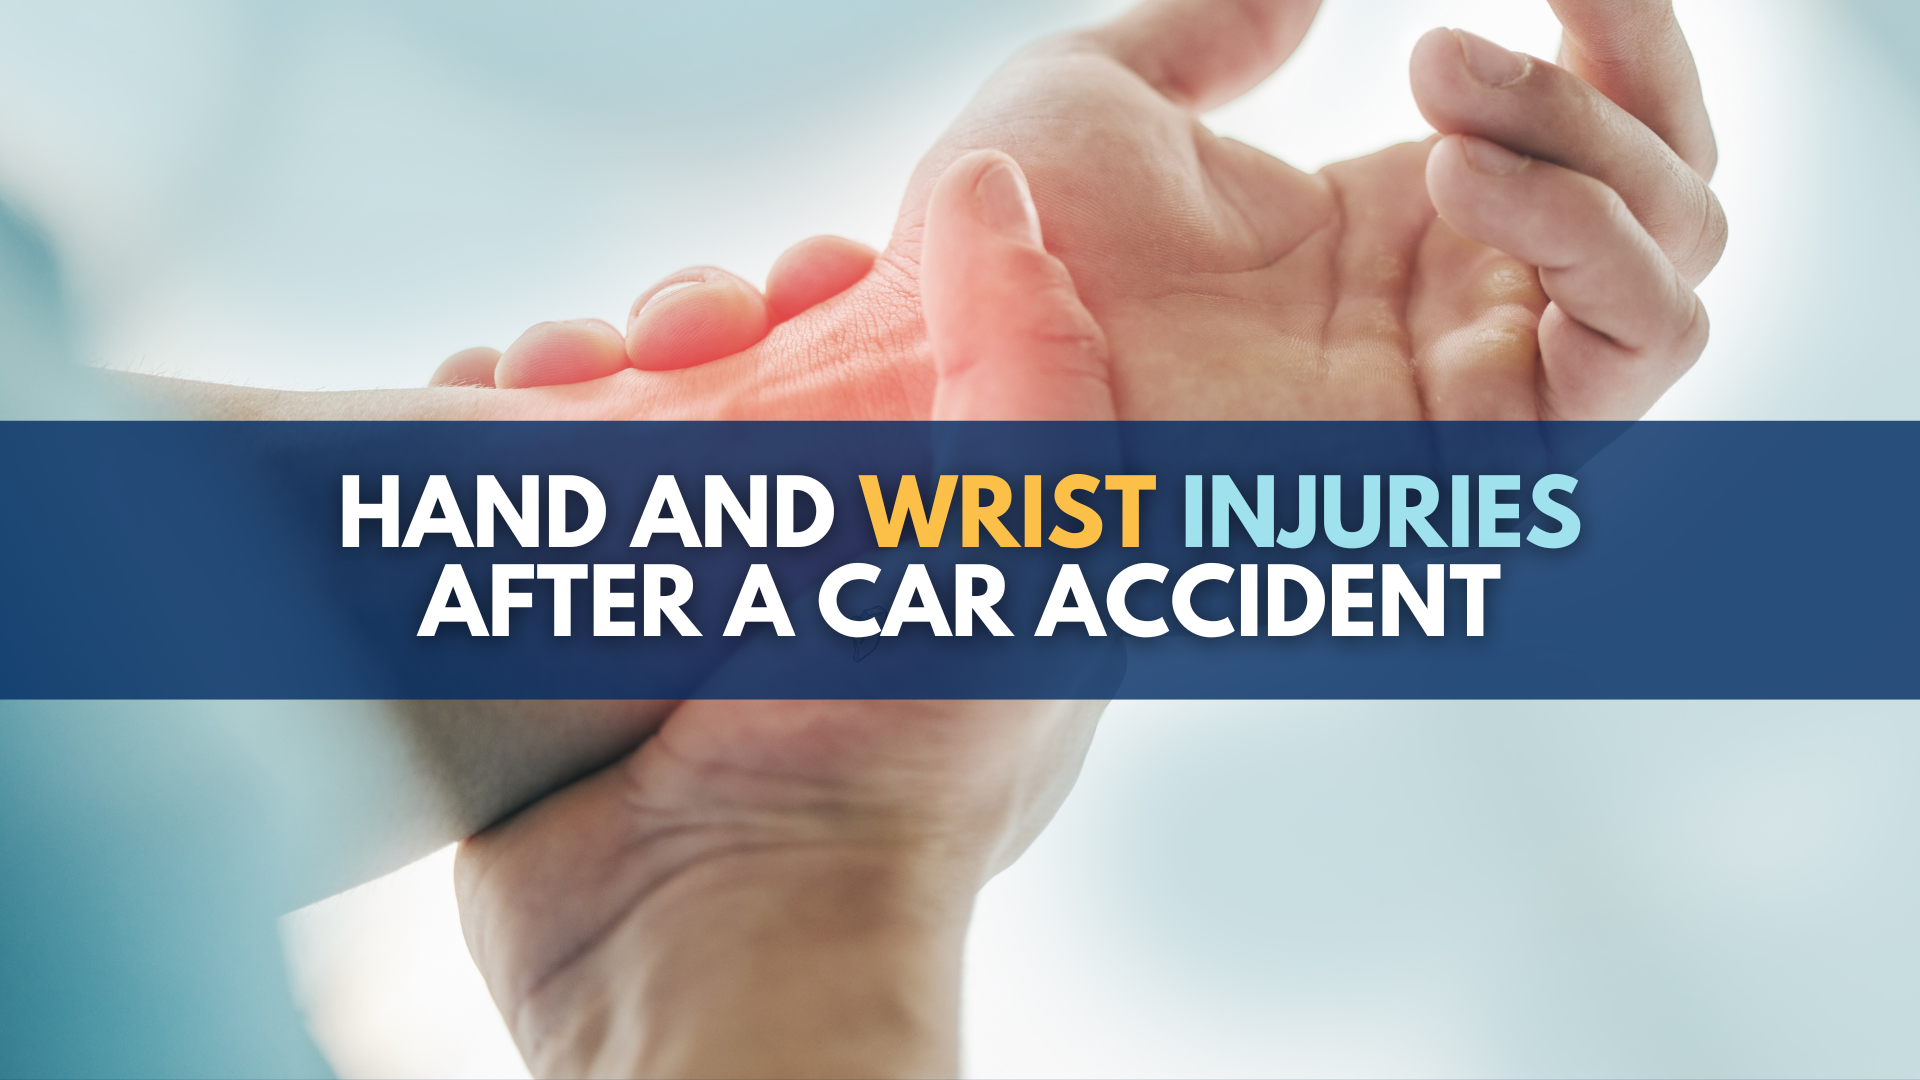 Hand and wrist injuries after a car accident